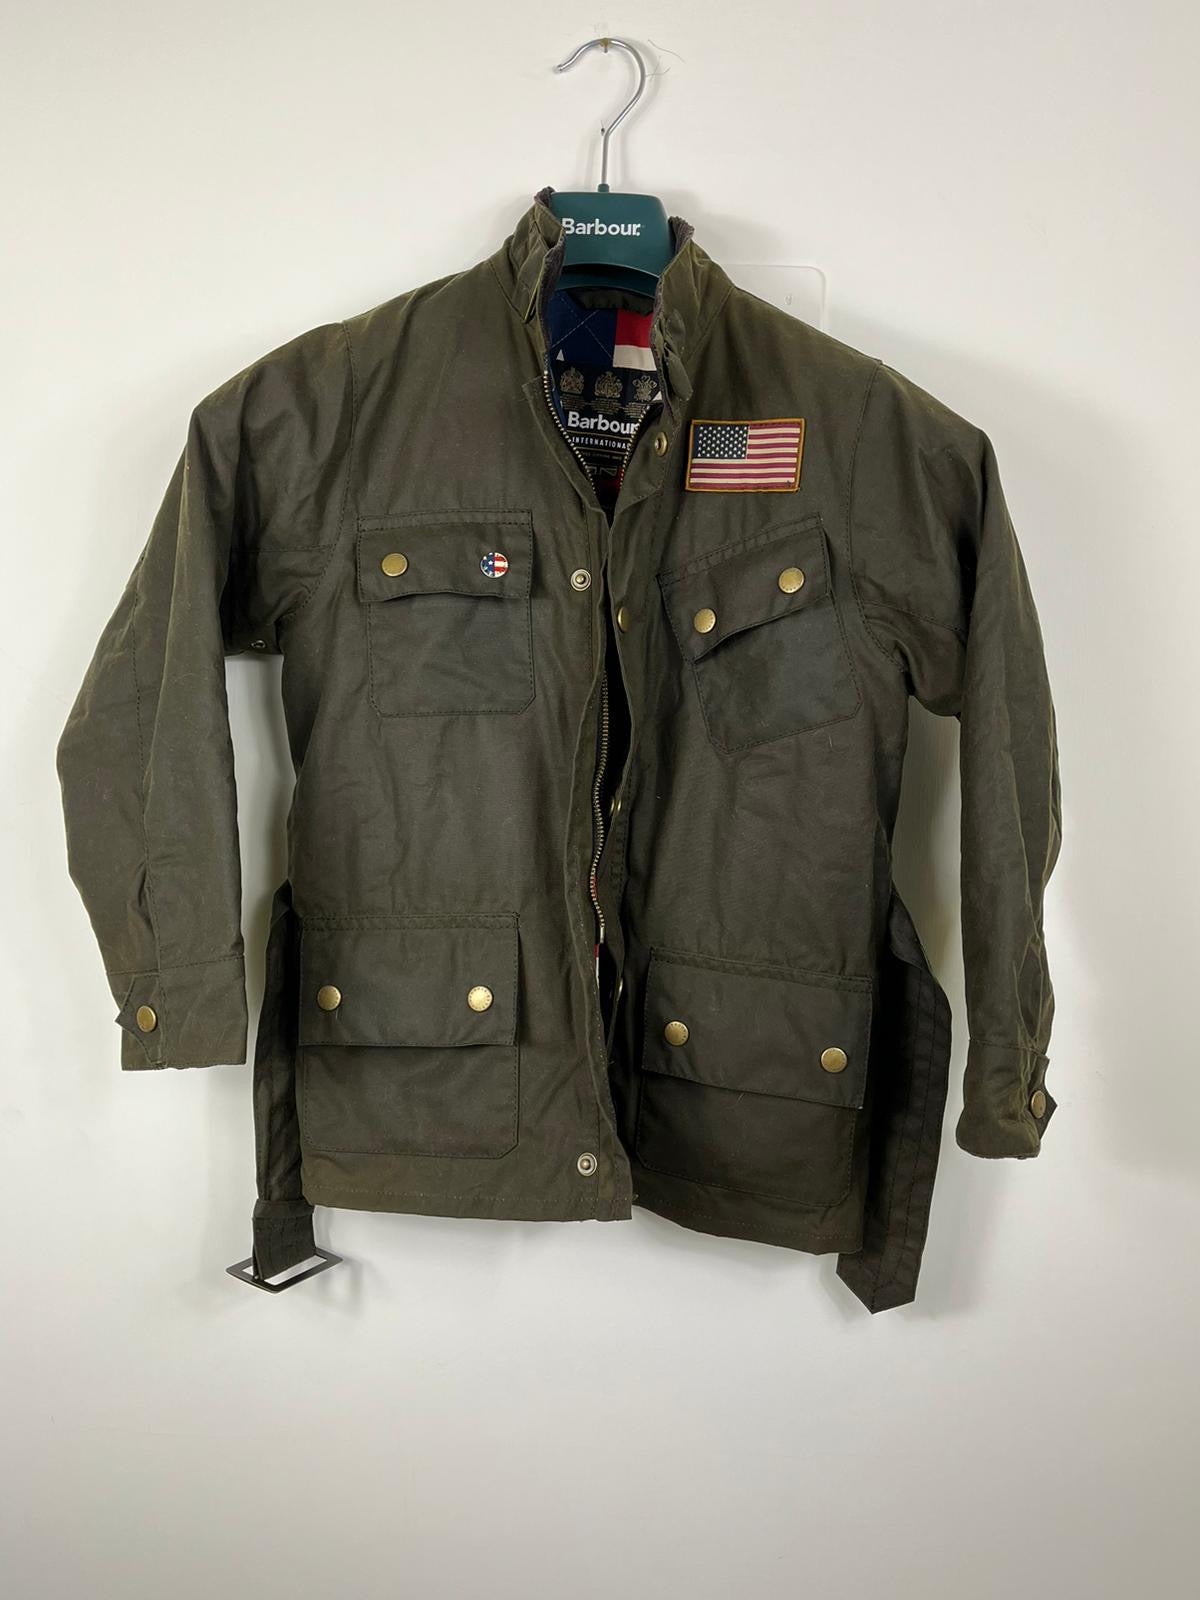 Giacca Barbour International Mc Queen verde cerato bambino Small Waxed green Jacket size 6/7 kid